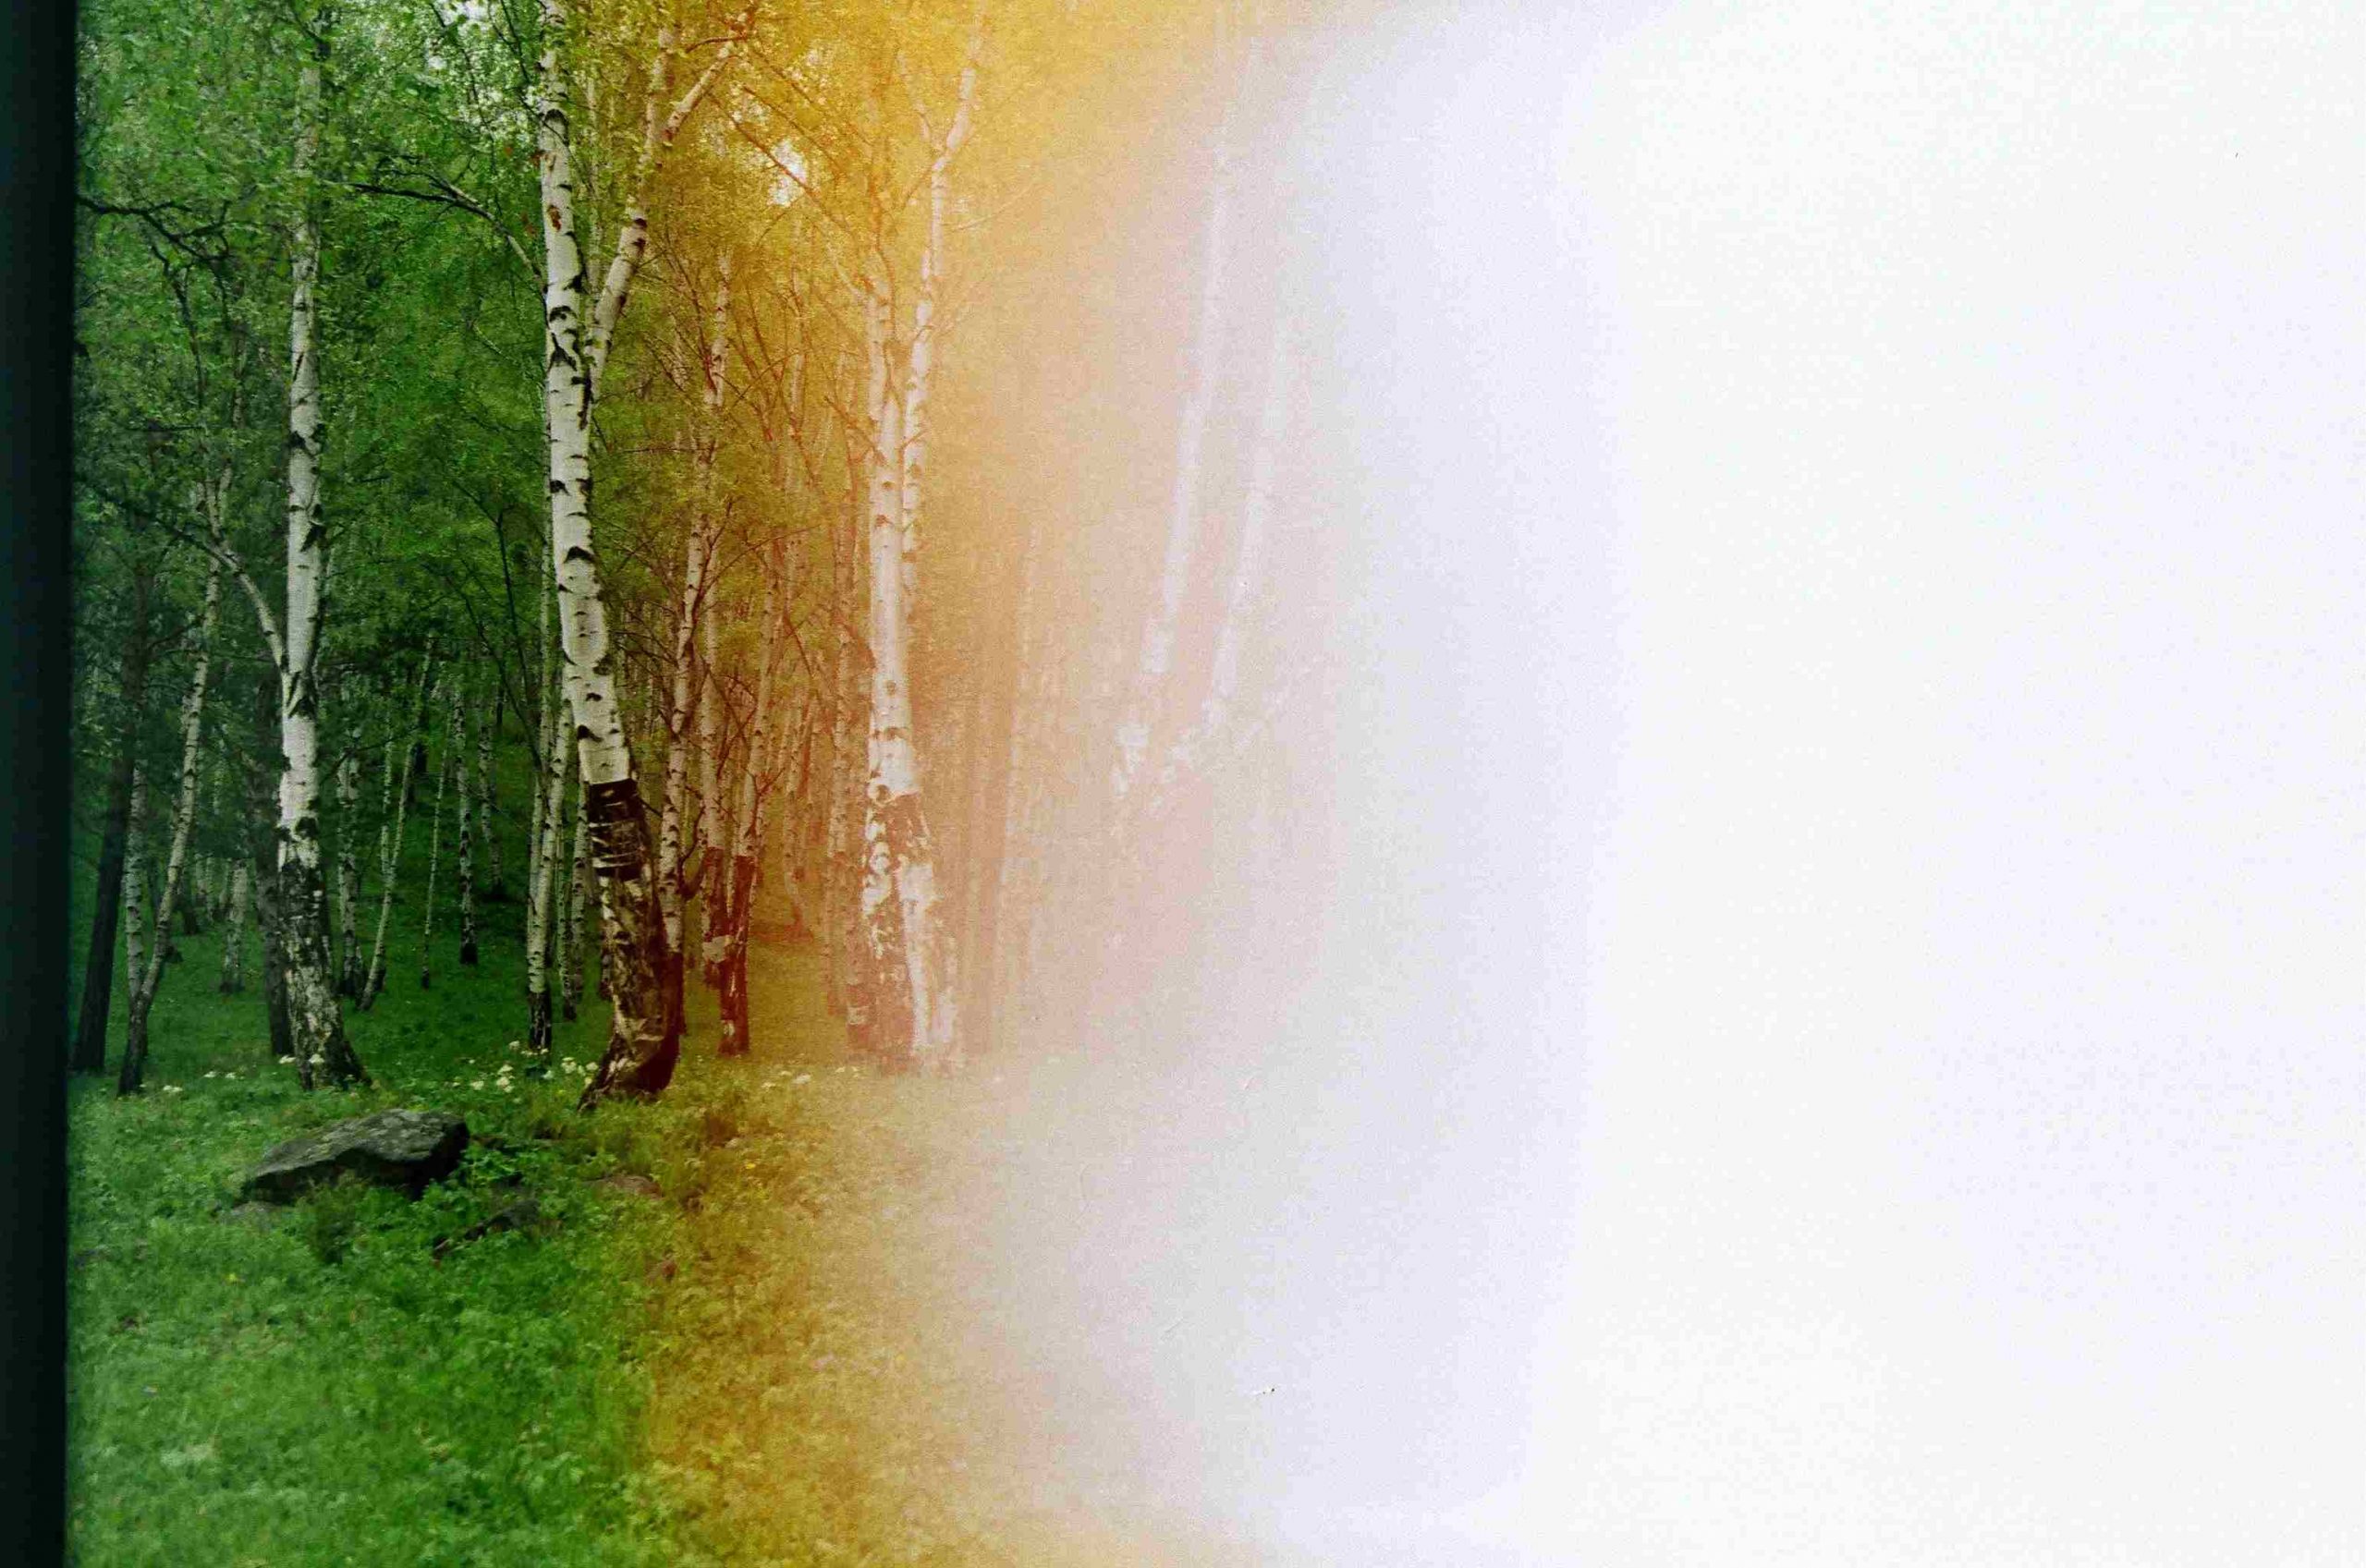 The left side of the image shows birch trees in the summer. The right side of the image is overexposed and white